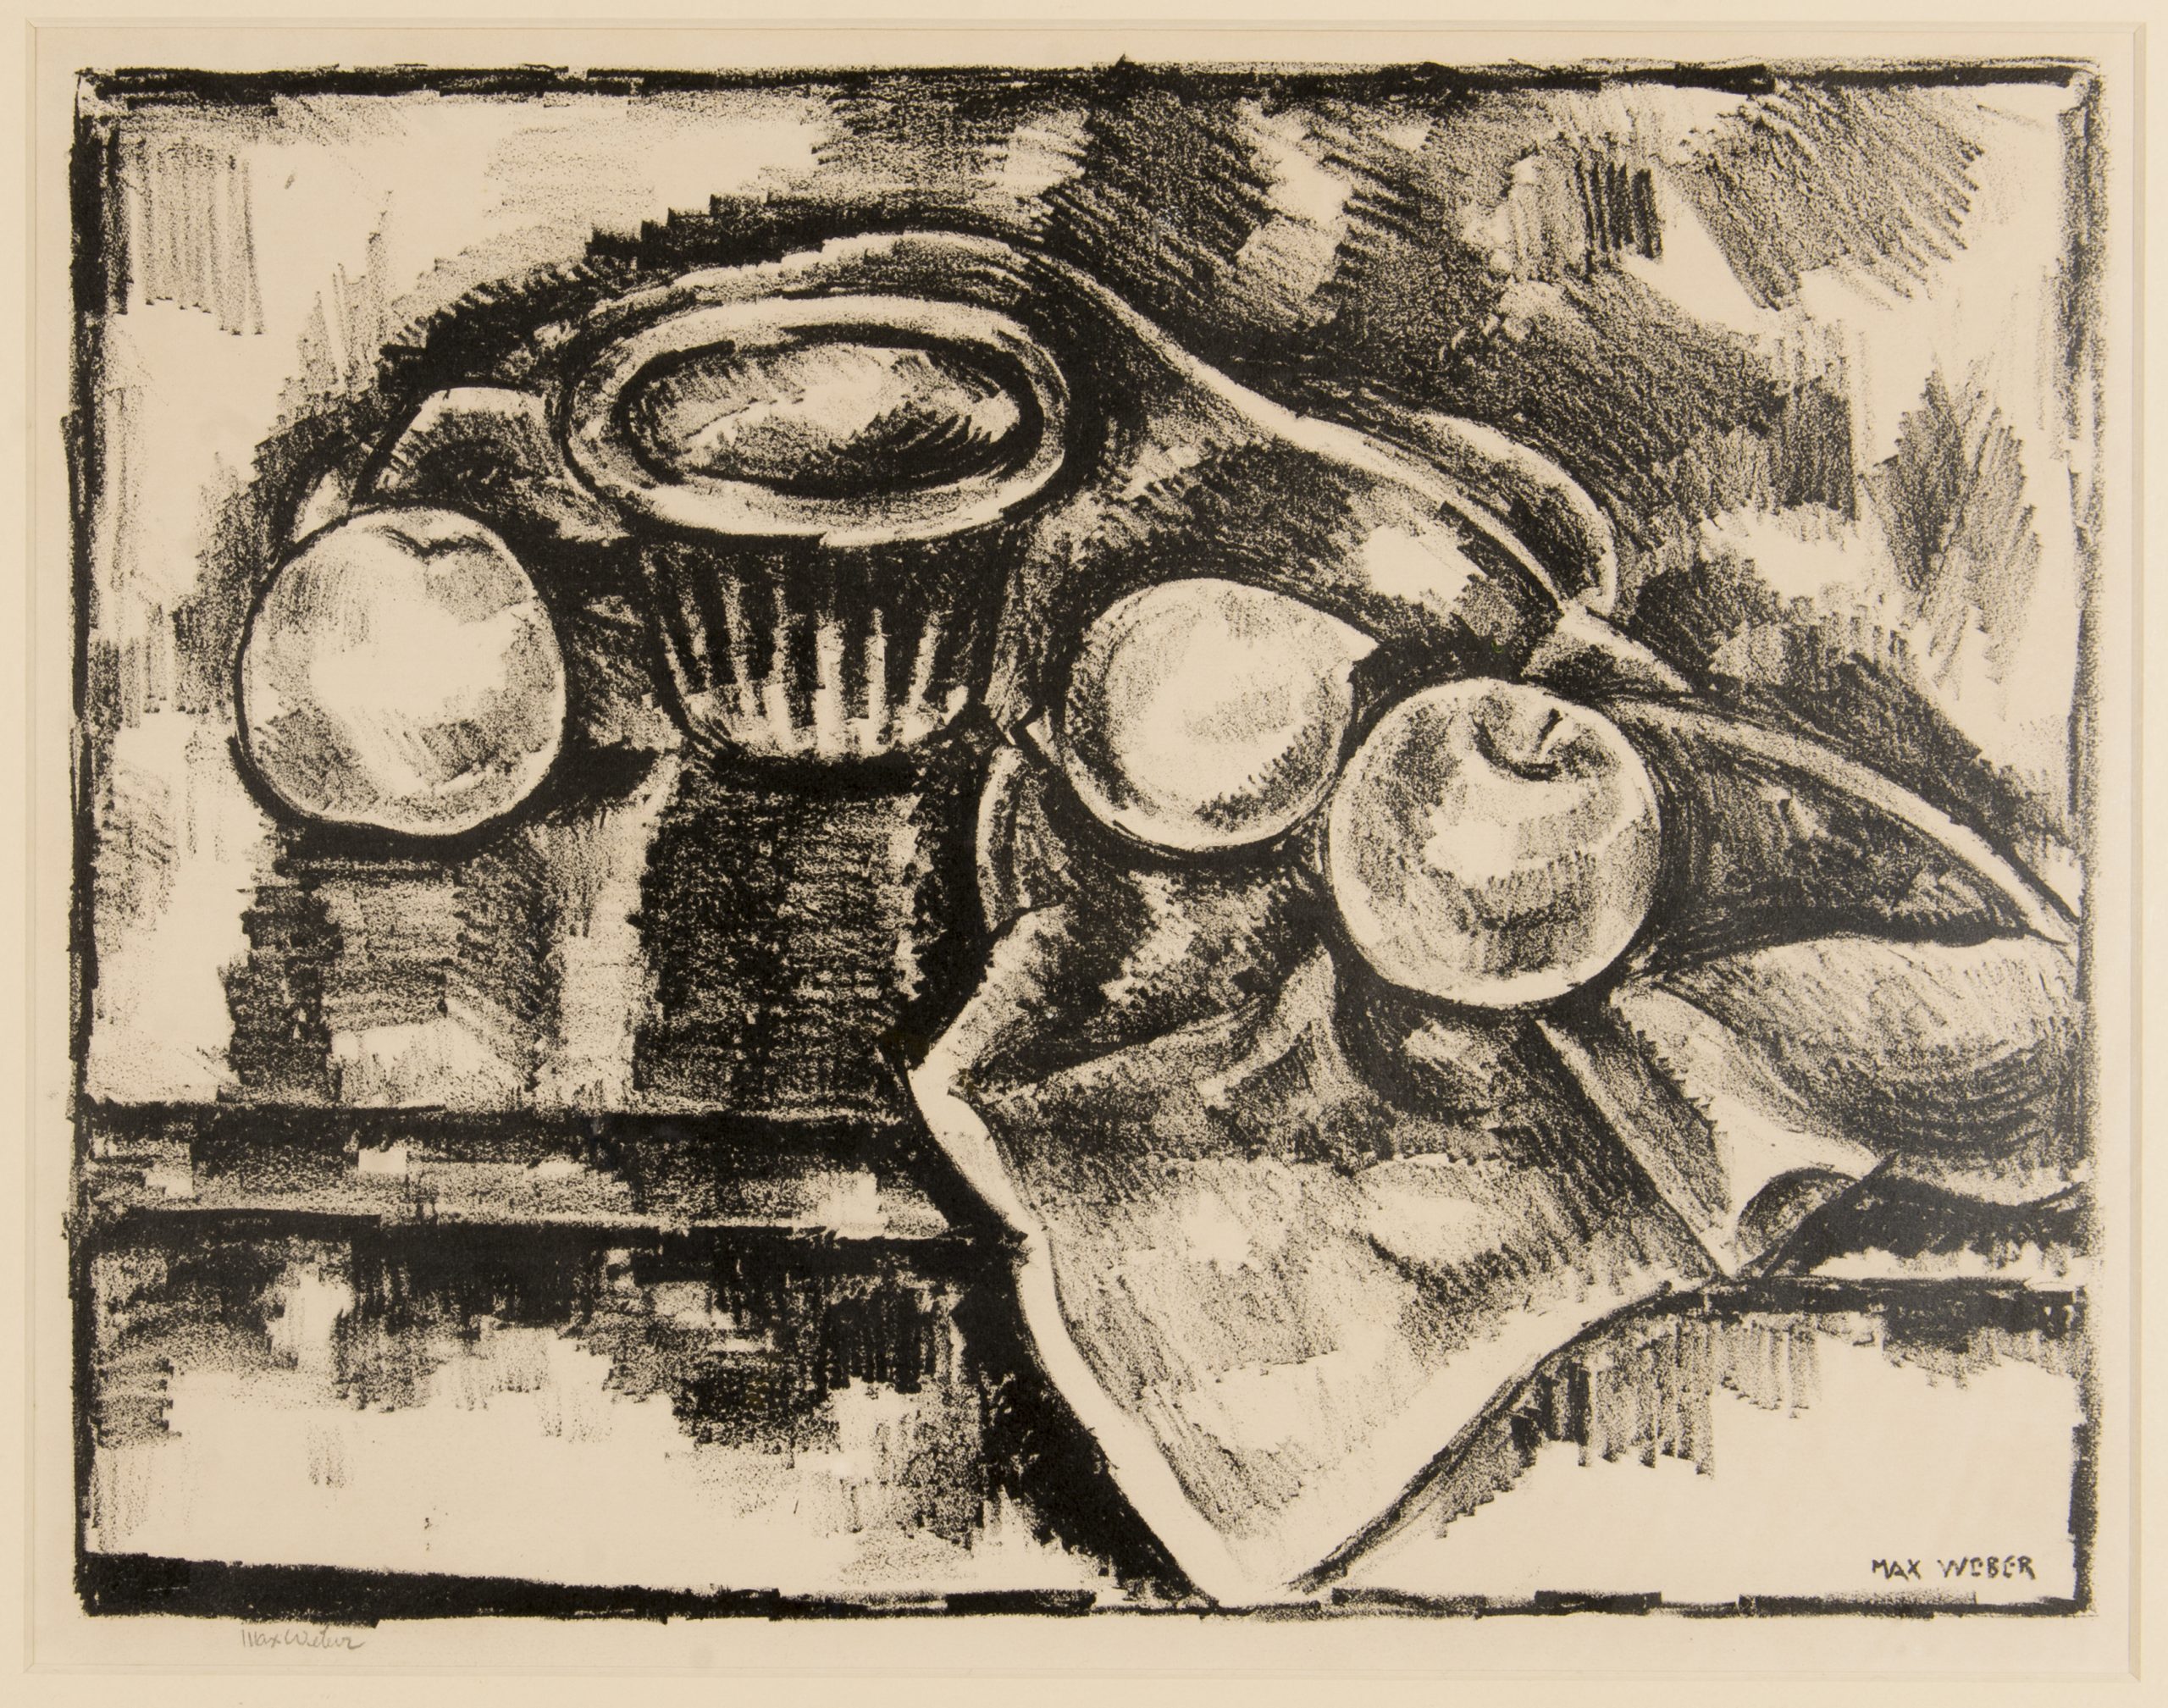 A lithograph print featuring a chalice and apples